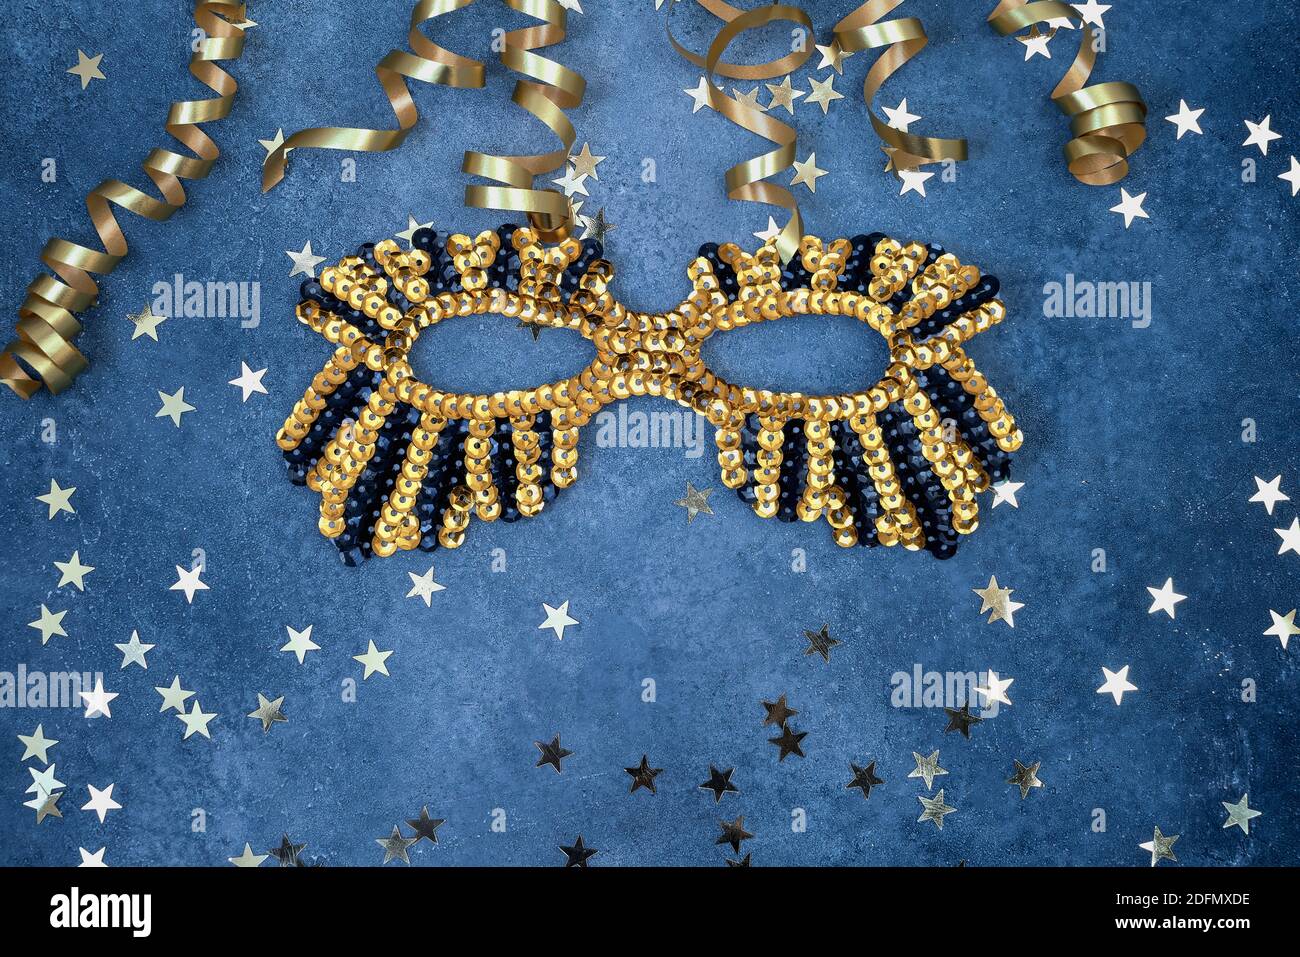 Golden glittering mask and serpentine with golden stars on a blue background. Top view, copy space. Carnival party celebration concept. Stock Photo